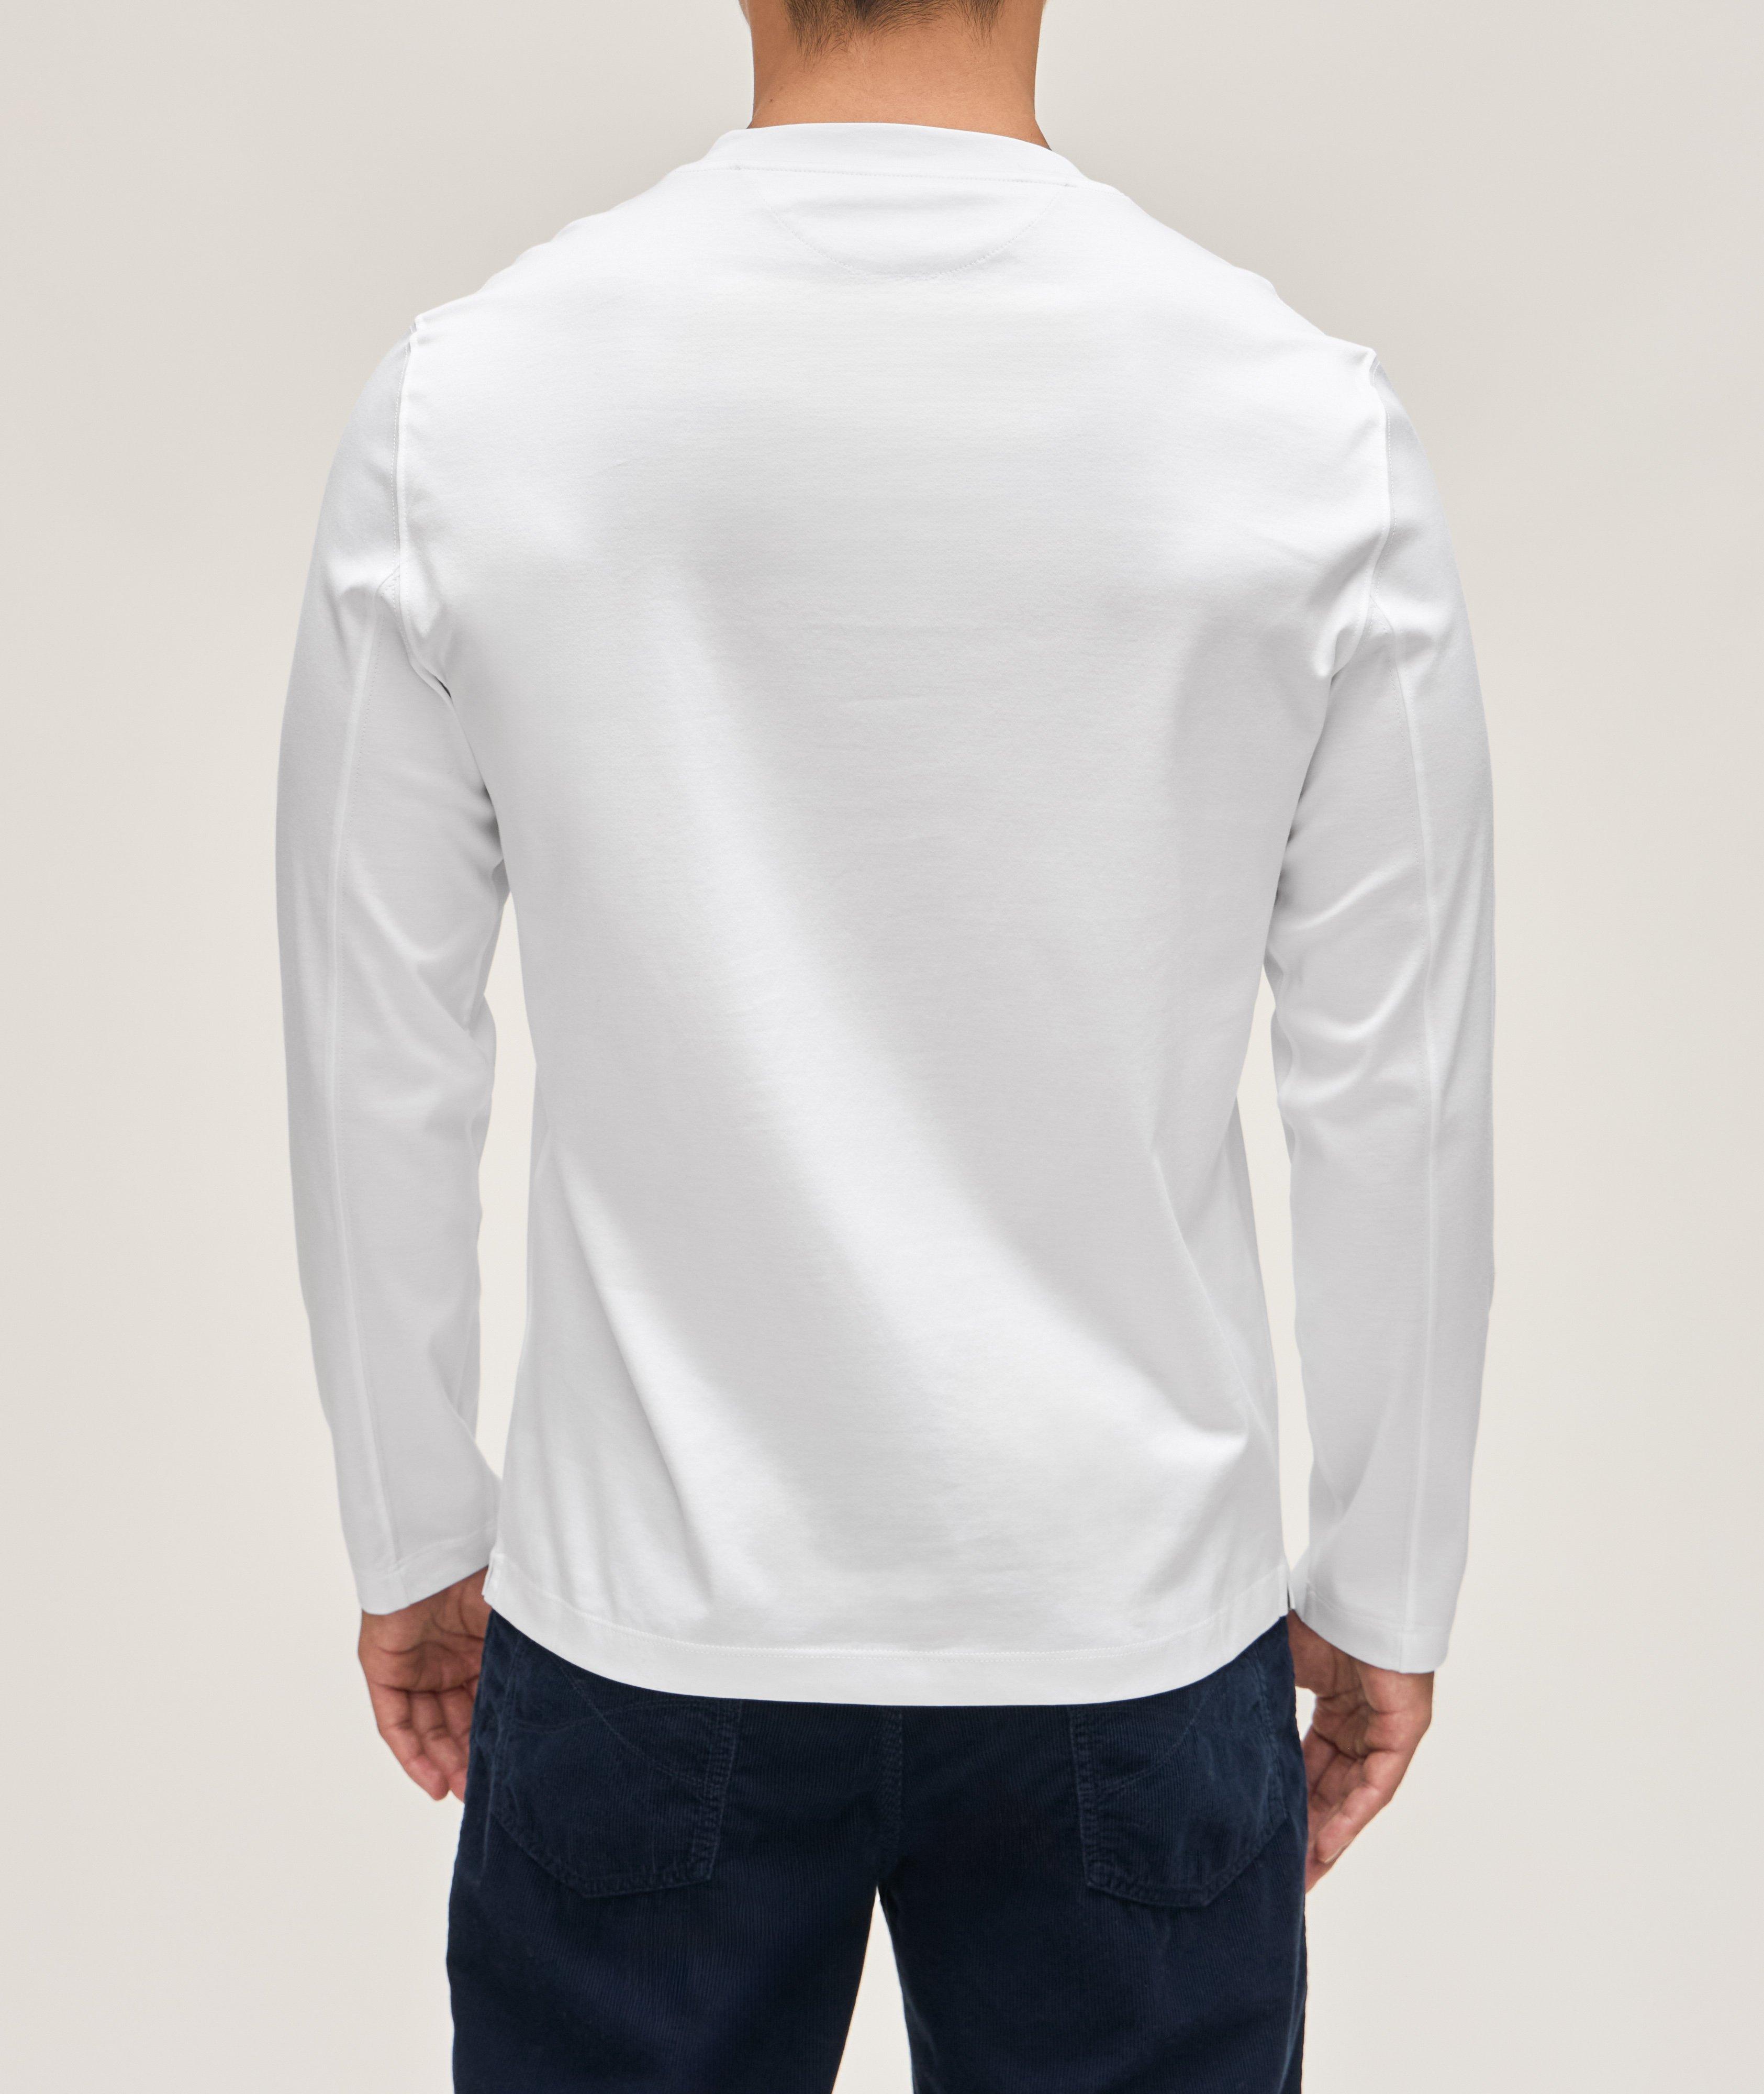 Essential Long-Sleeve Jersey Cotton T-Shirt  image 2